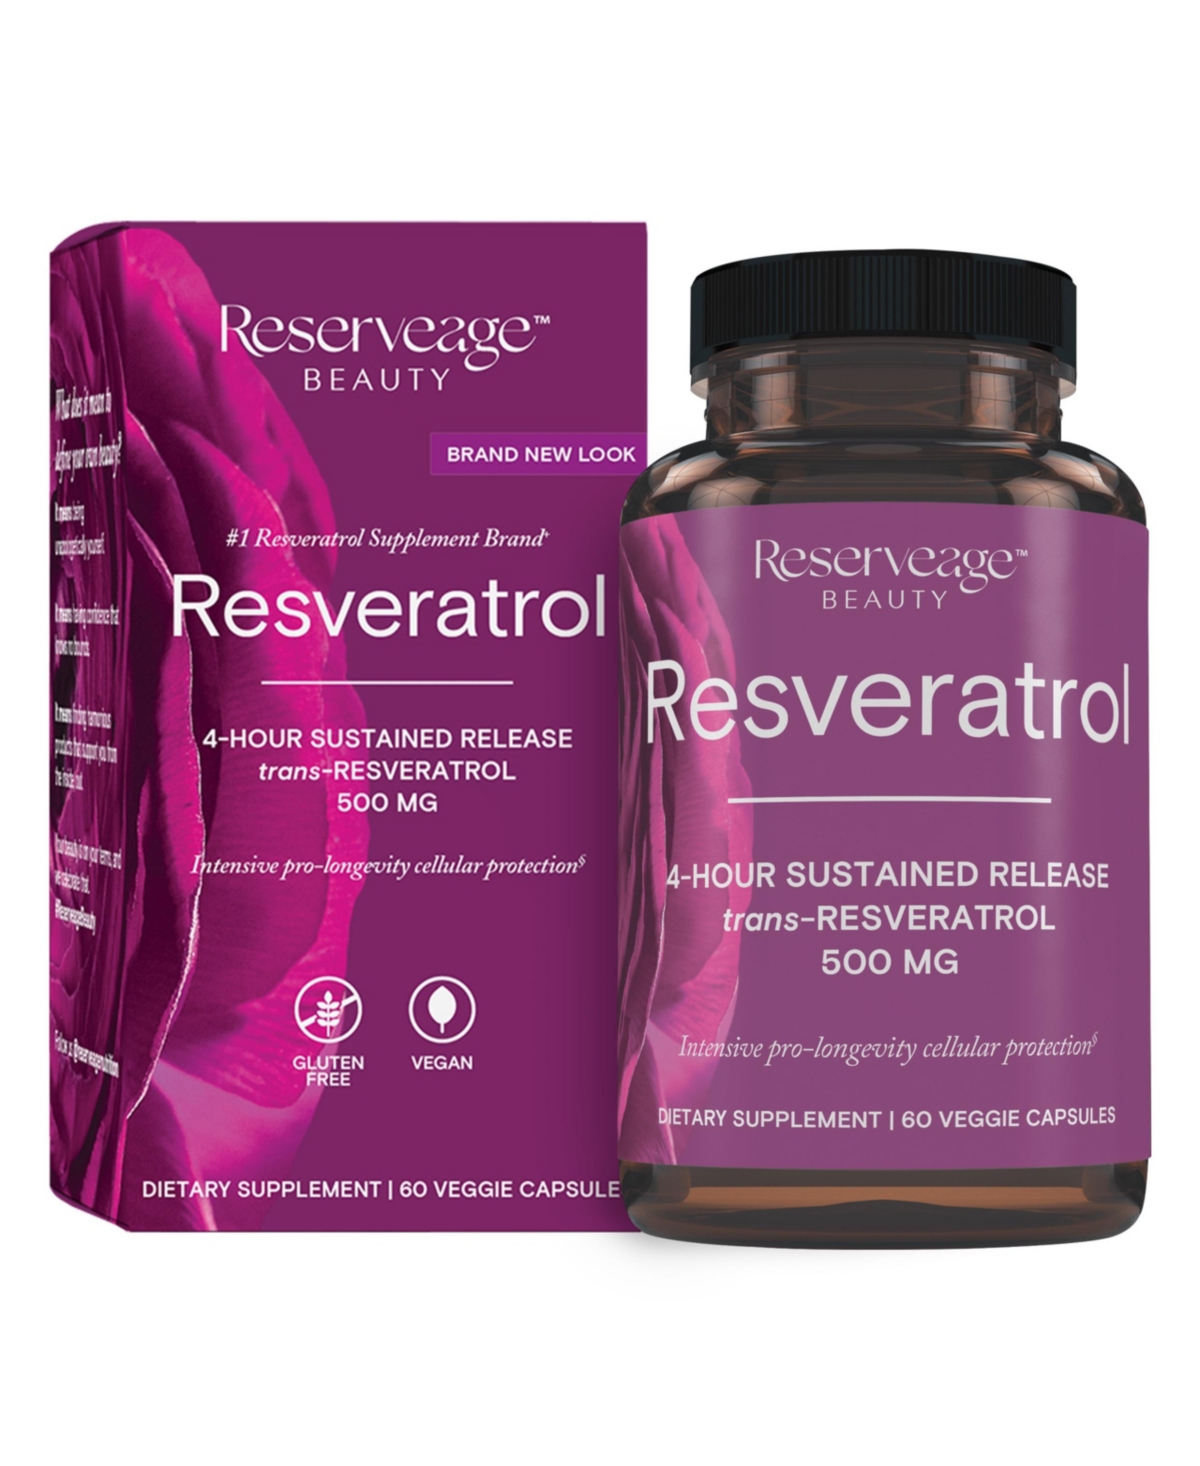 Resveratrol 500 mg, Antioxidant Supplement for Heart and Cellular Health, Supports Healthy Aging, Paleo, Keto, 60 Capsules